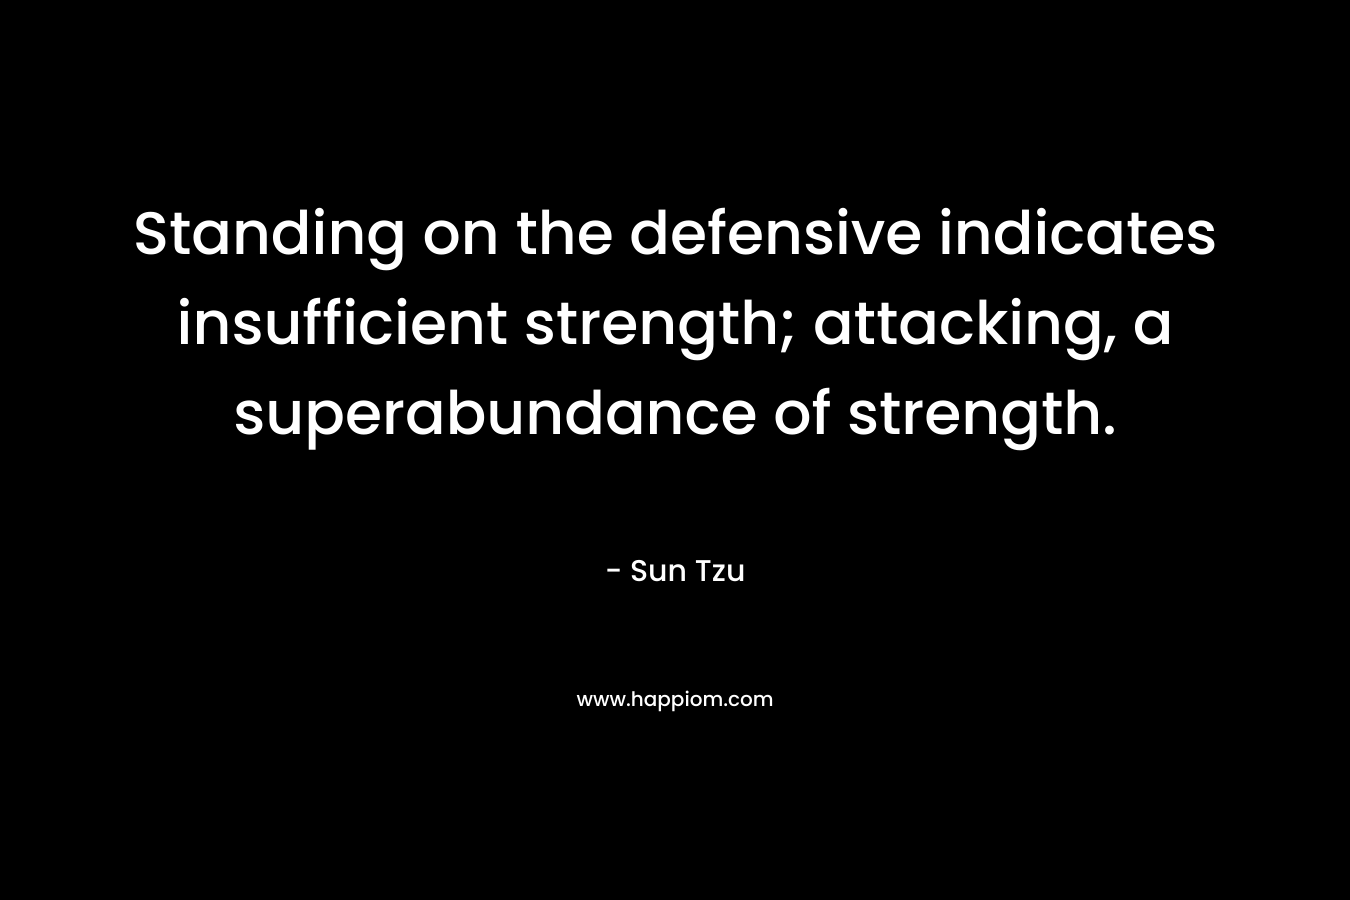 Standing on the defensive indicates insufficient strength; attacking, a superabundance of strength. – Sun Tzu